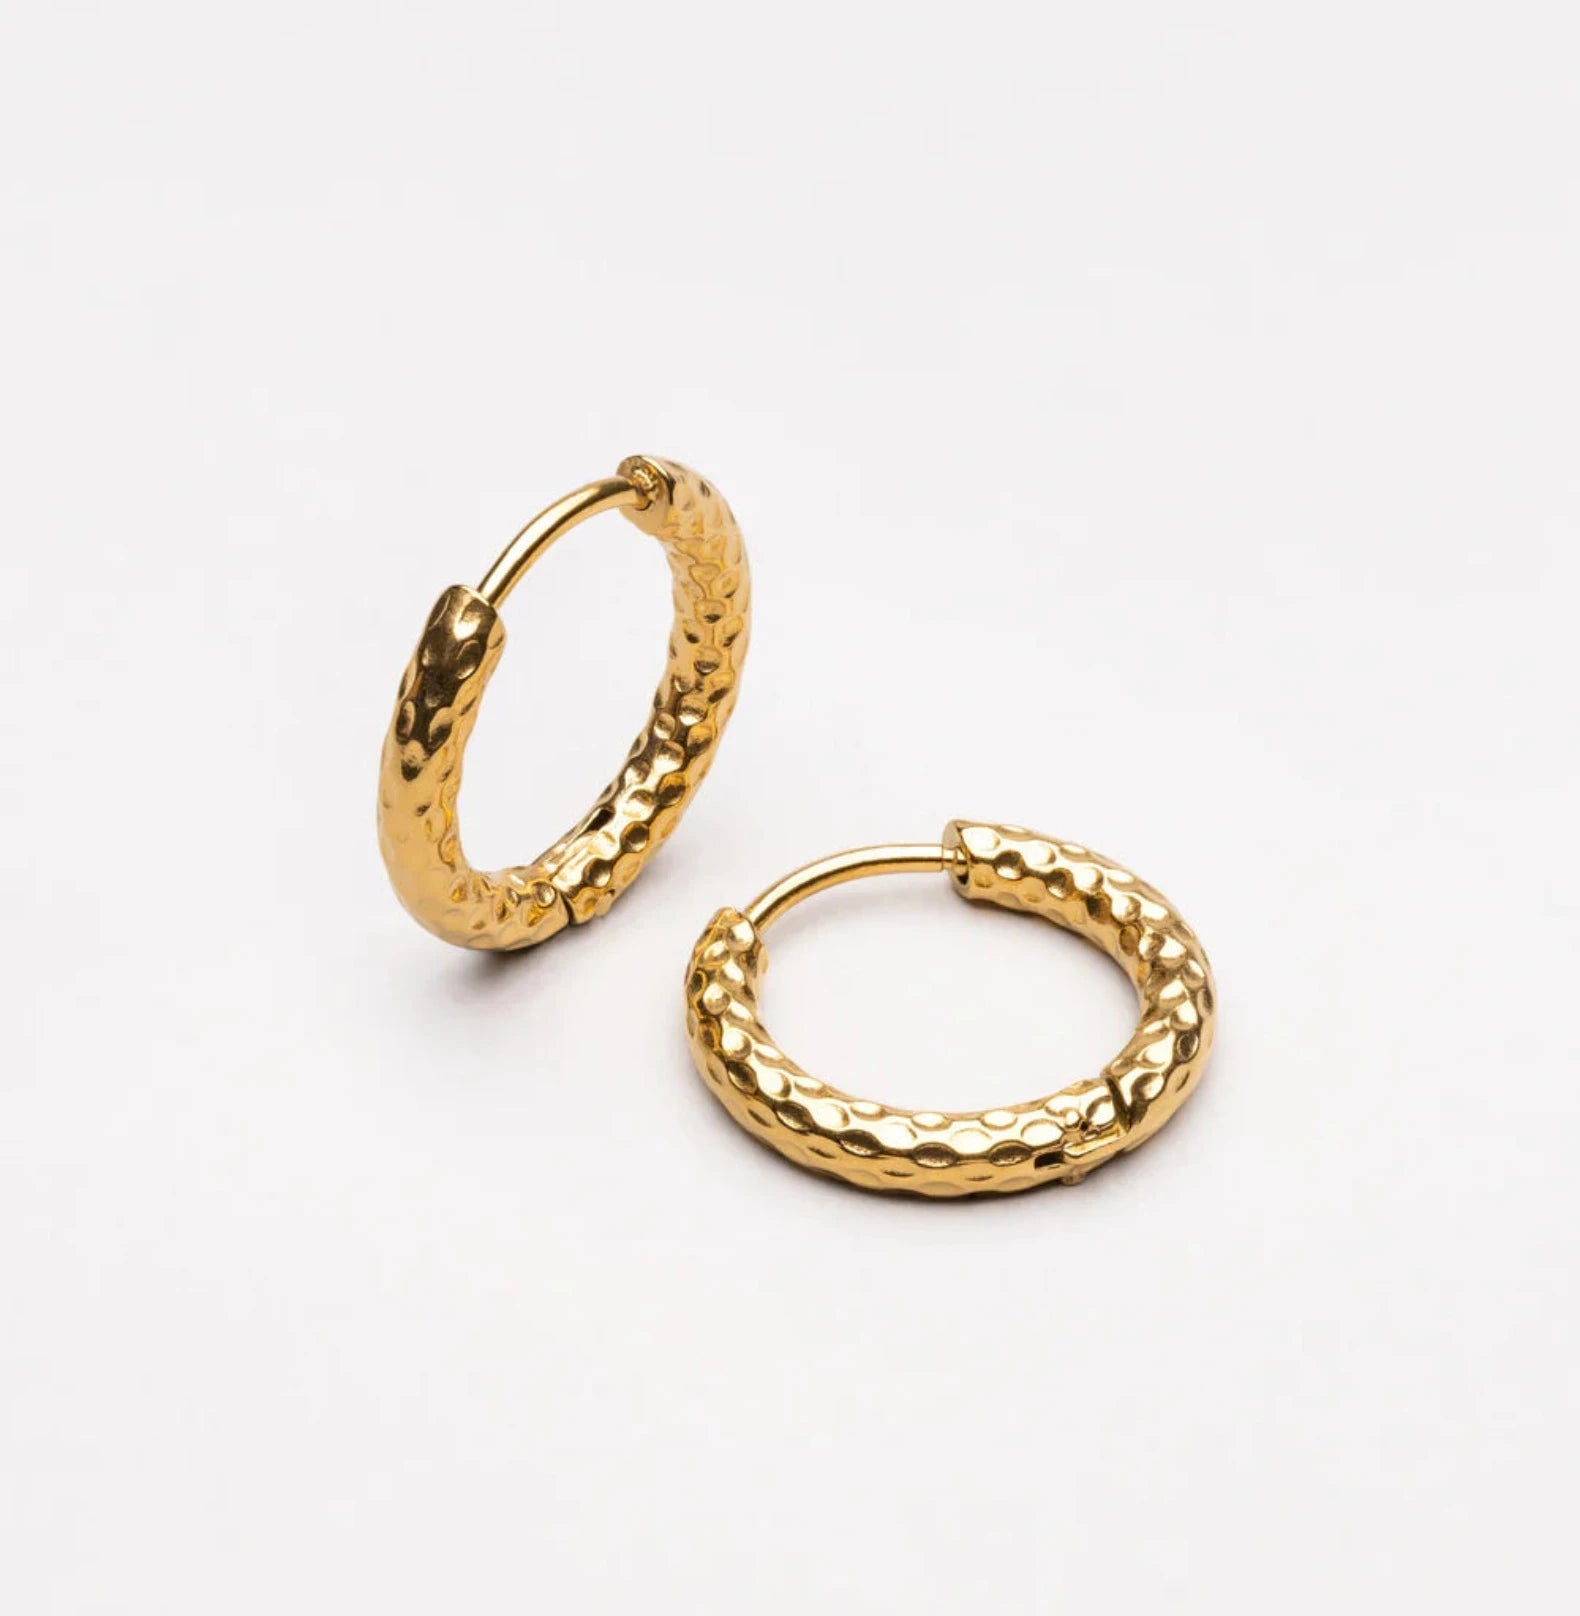 EAR HOOPS EARRINGS braclet Yubama Jewelry Online Store - The Elegant Designs of Gold and Silver ! 